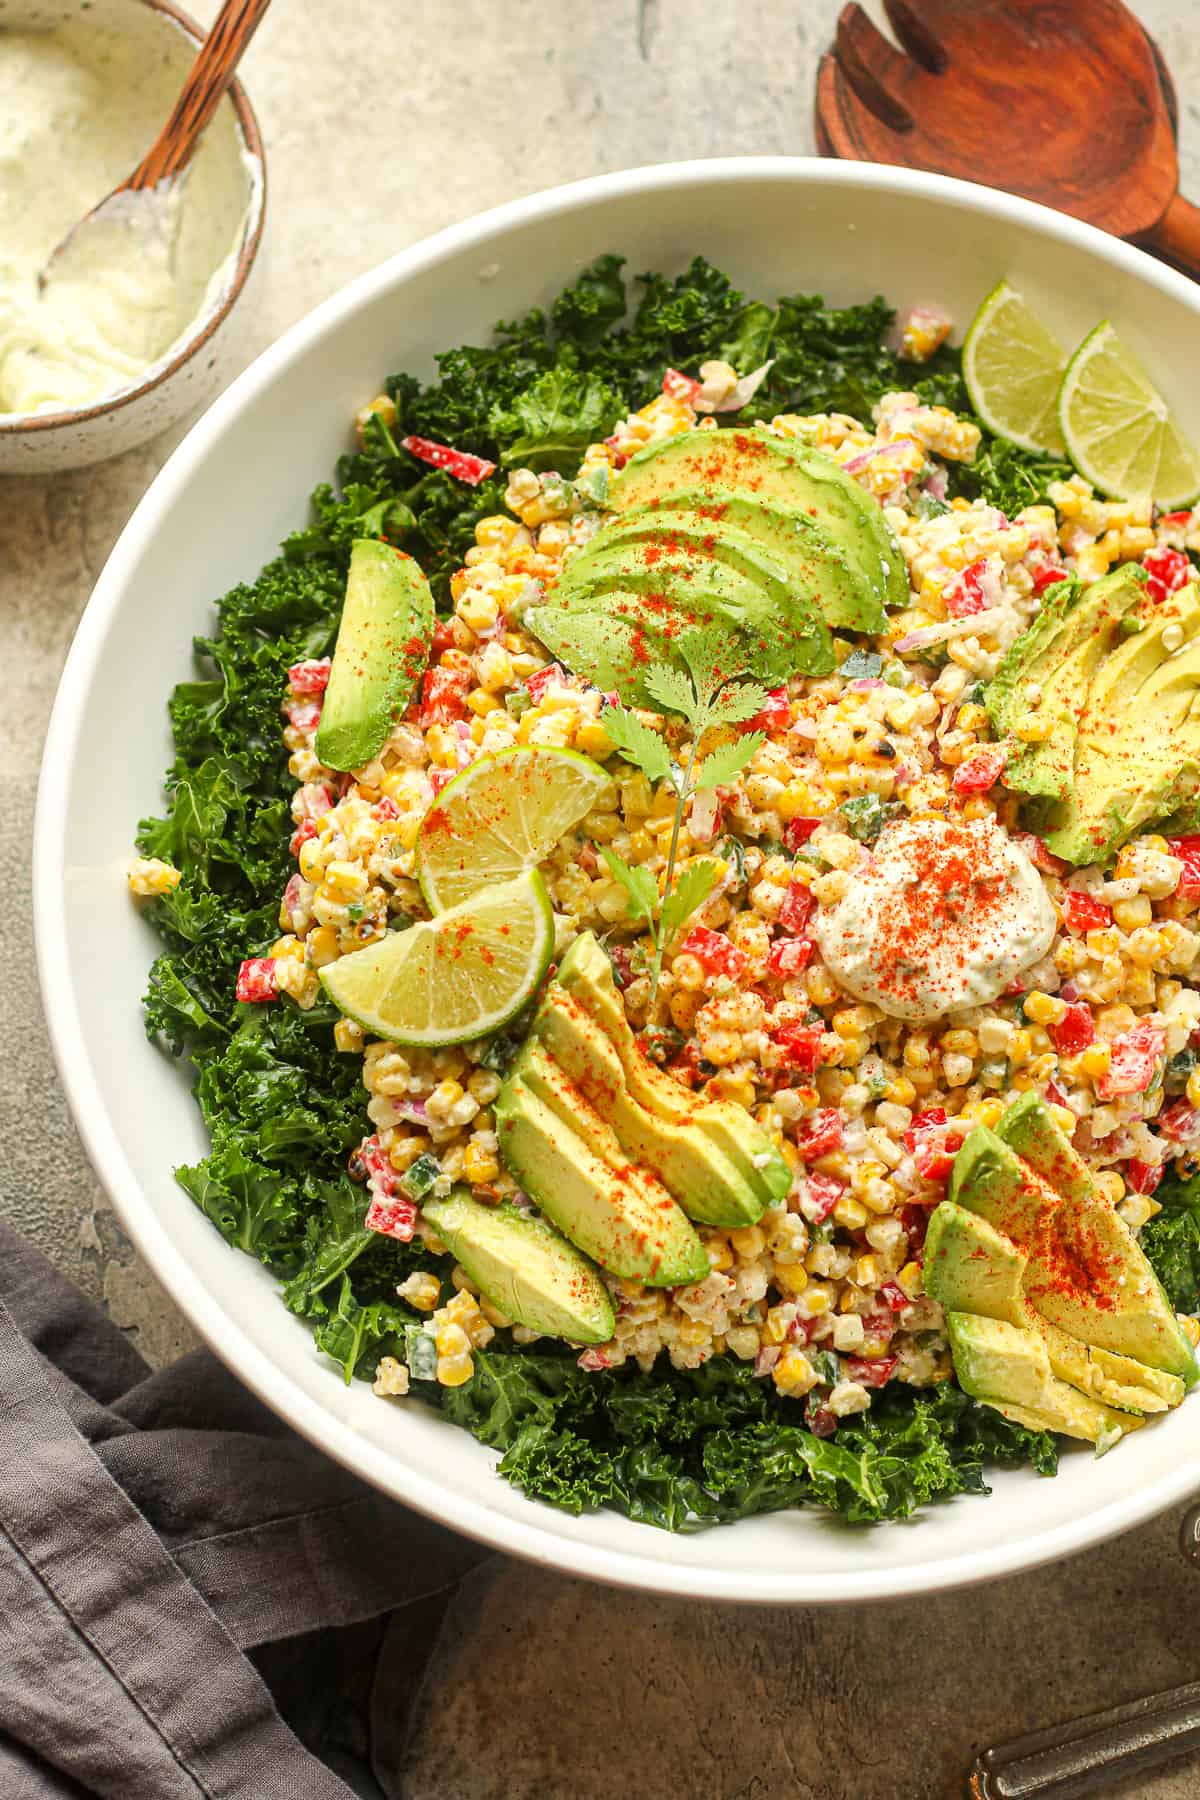 Overhead view of a serving bowl of kale salad topped with Mexican street corn and avocado slices.